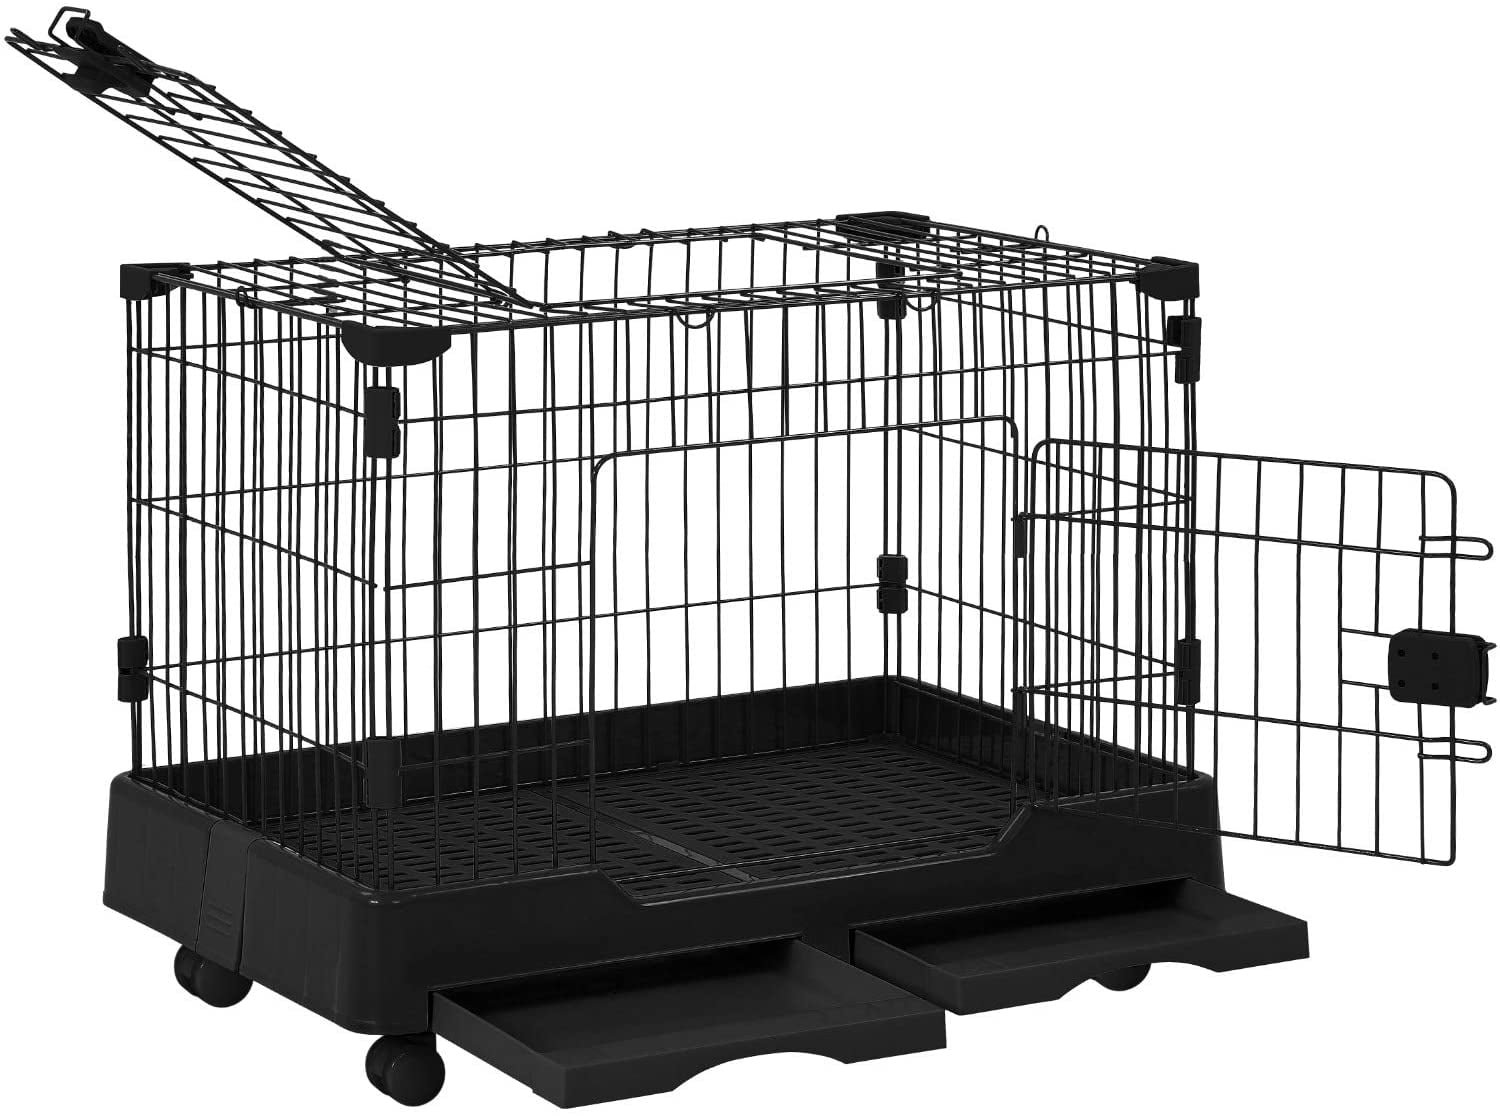 BestPet Cat Cage Cat Crate Kennel Cat Playpen Two Door Cat House Furniture Pet Enclosure Beds Removable Tray Cage for Small Animal Cats Rabbit Guinea Pigs 